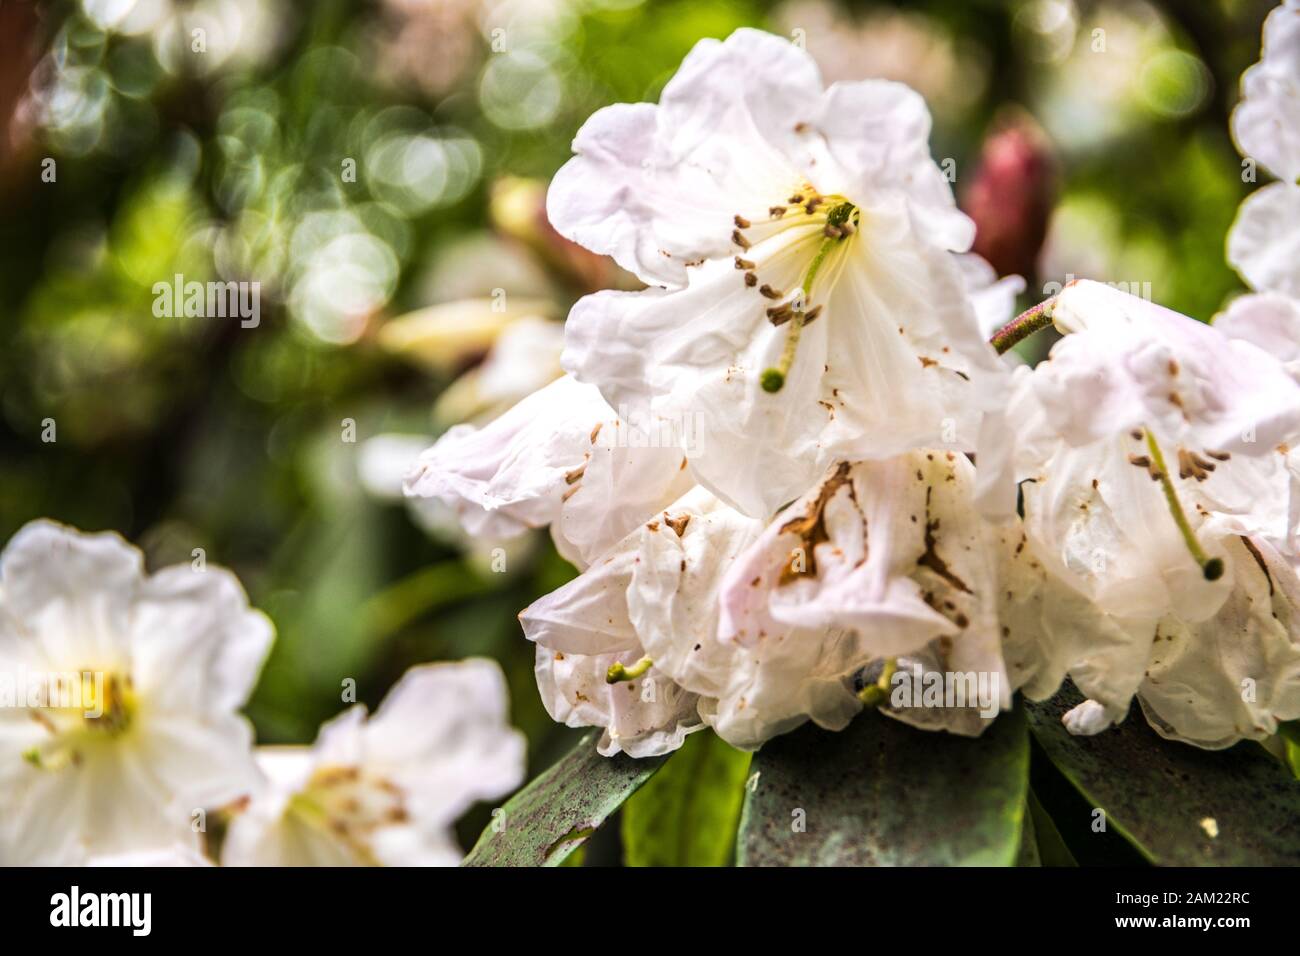 Beautiful white flowers with wrinkled petals Stock Photo